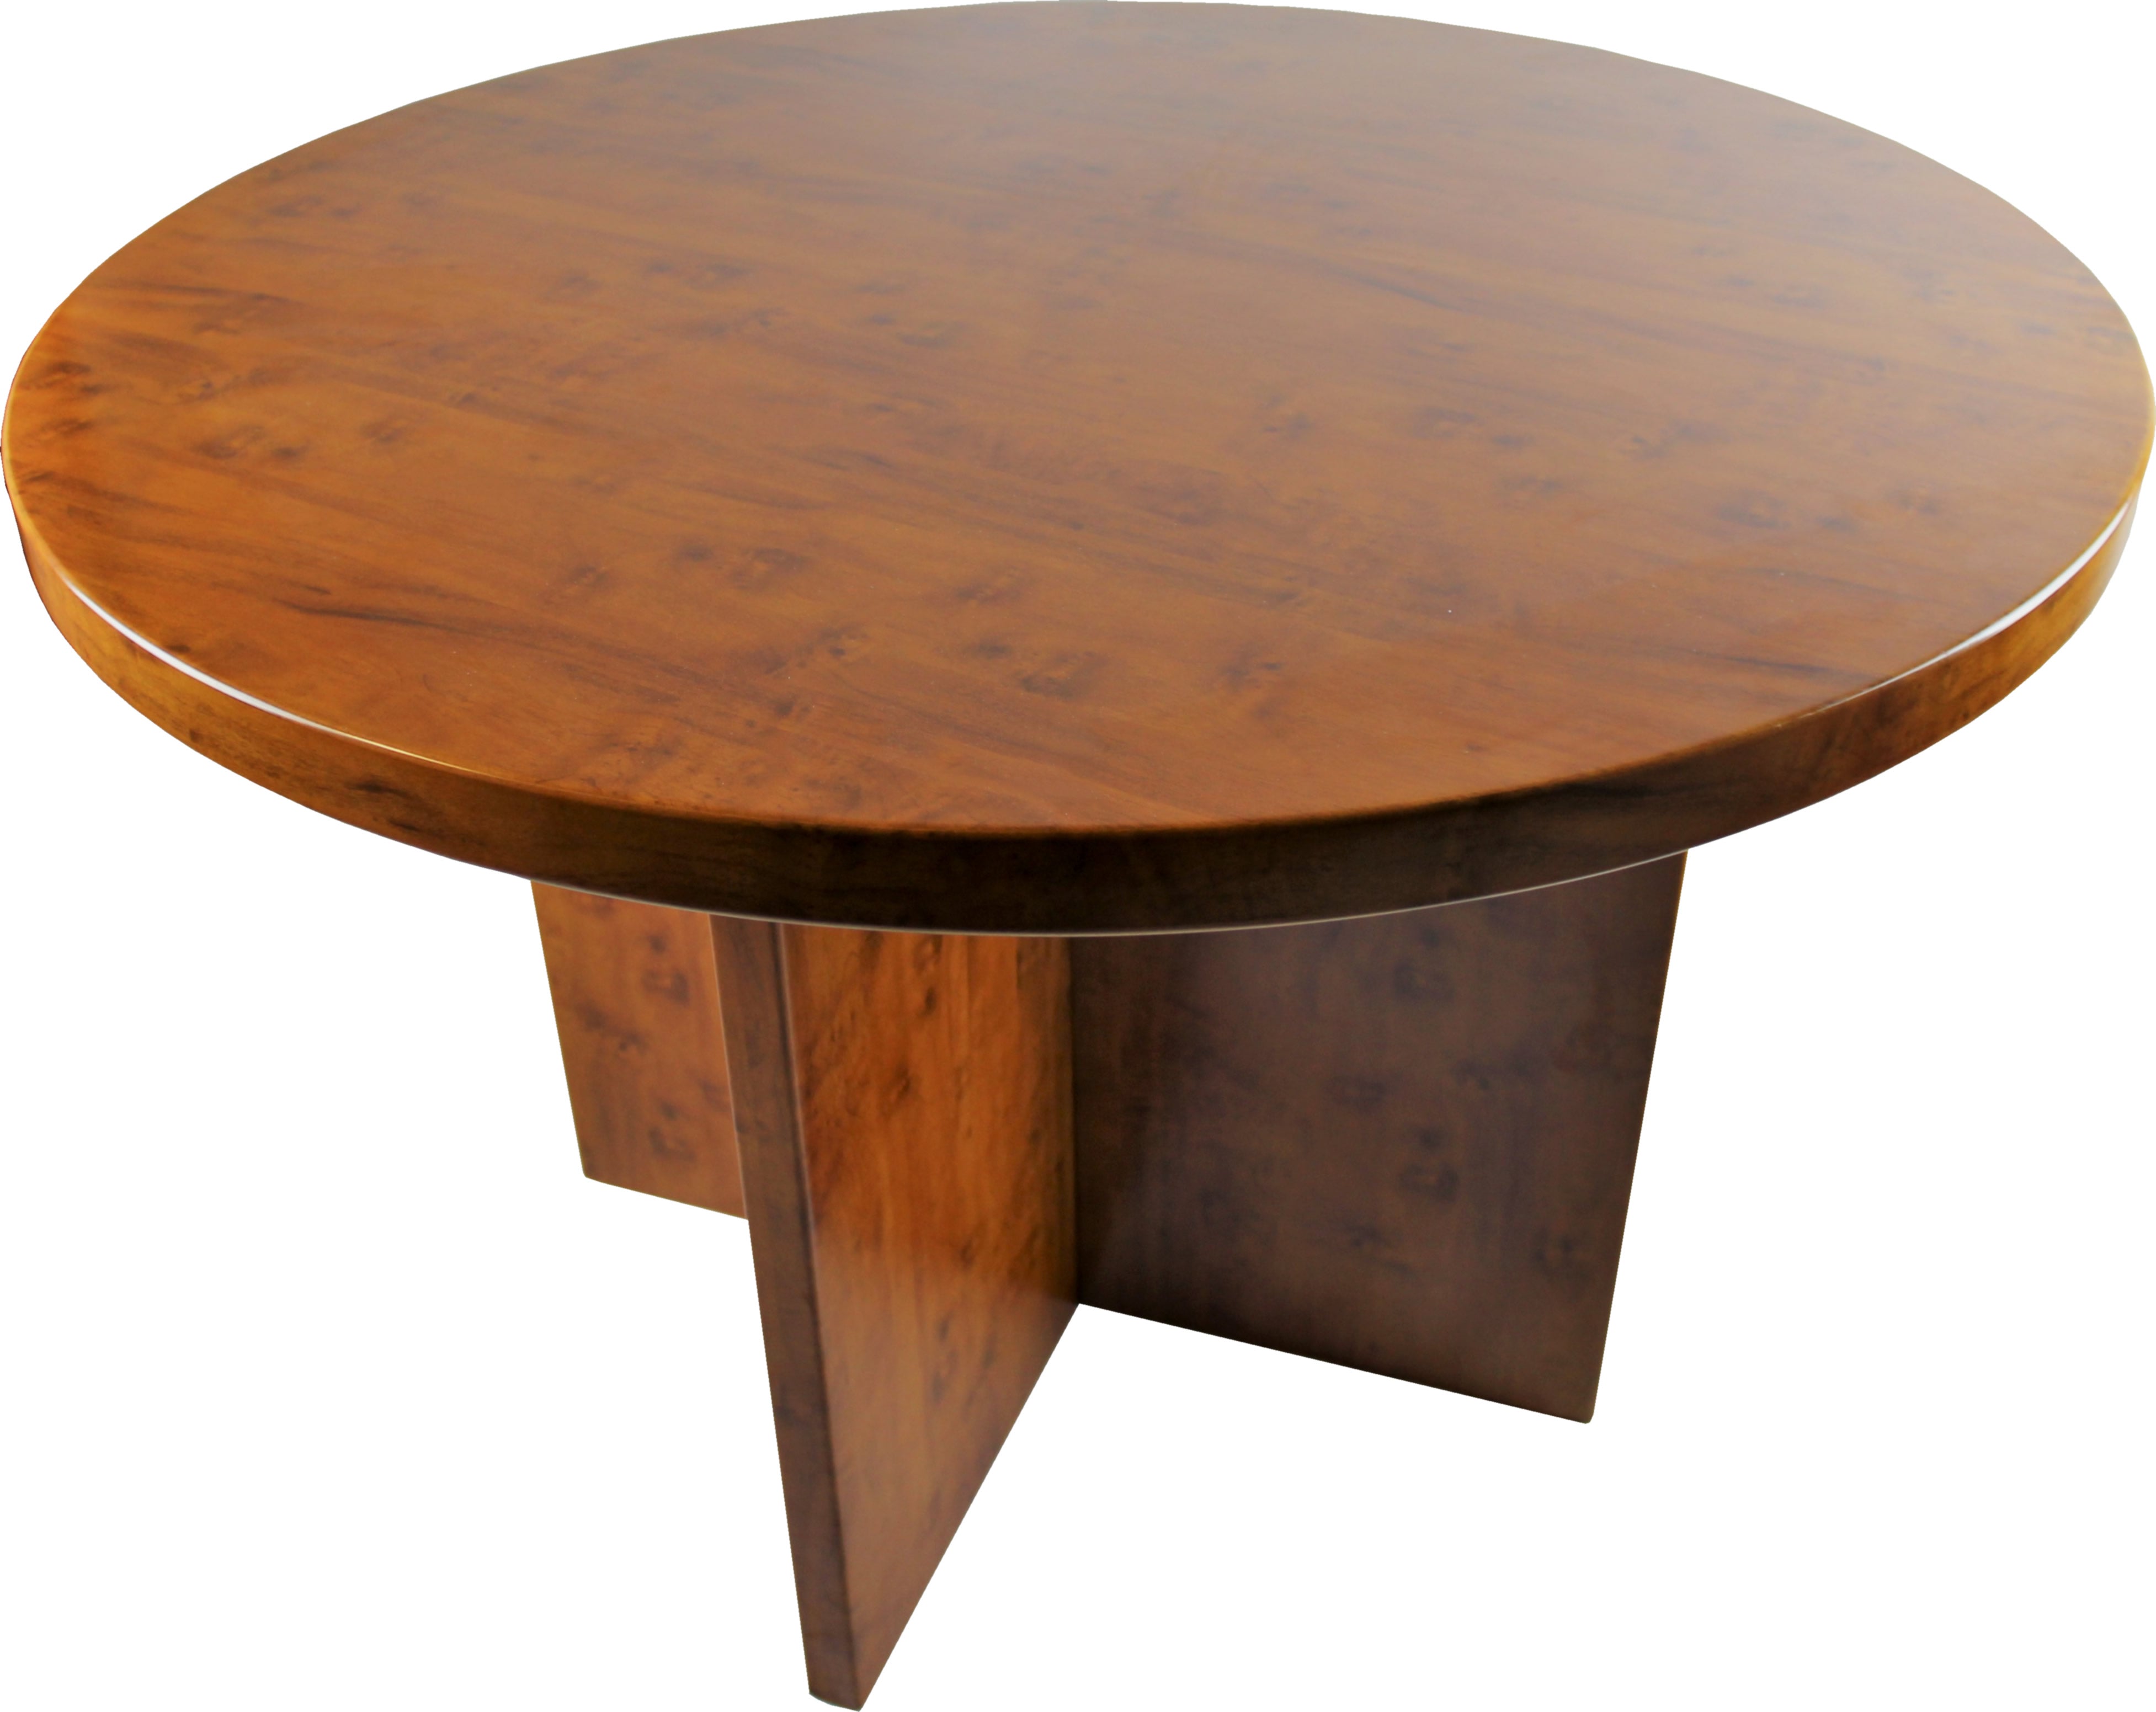 Executive Round Meeting Room Table Yew - B02